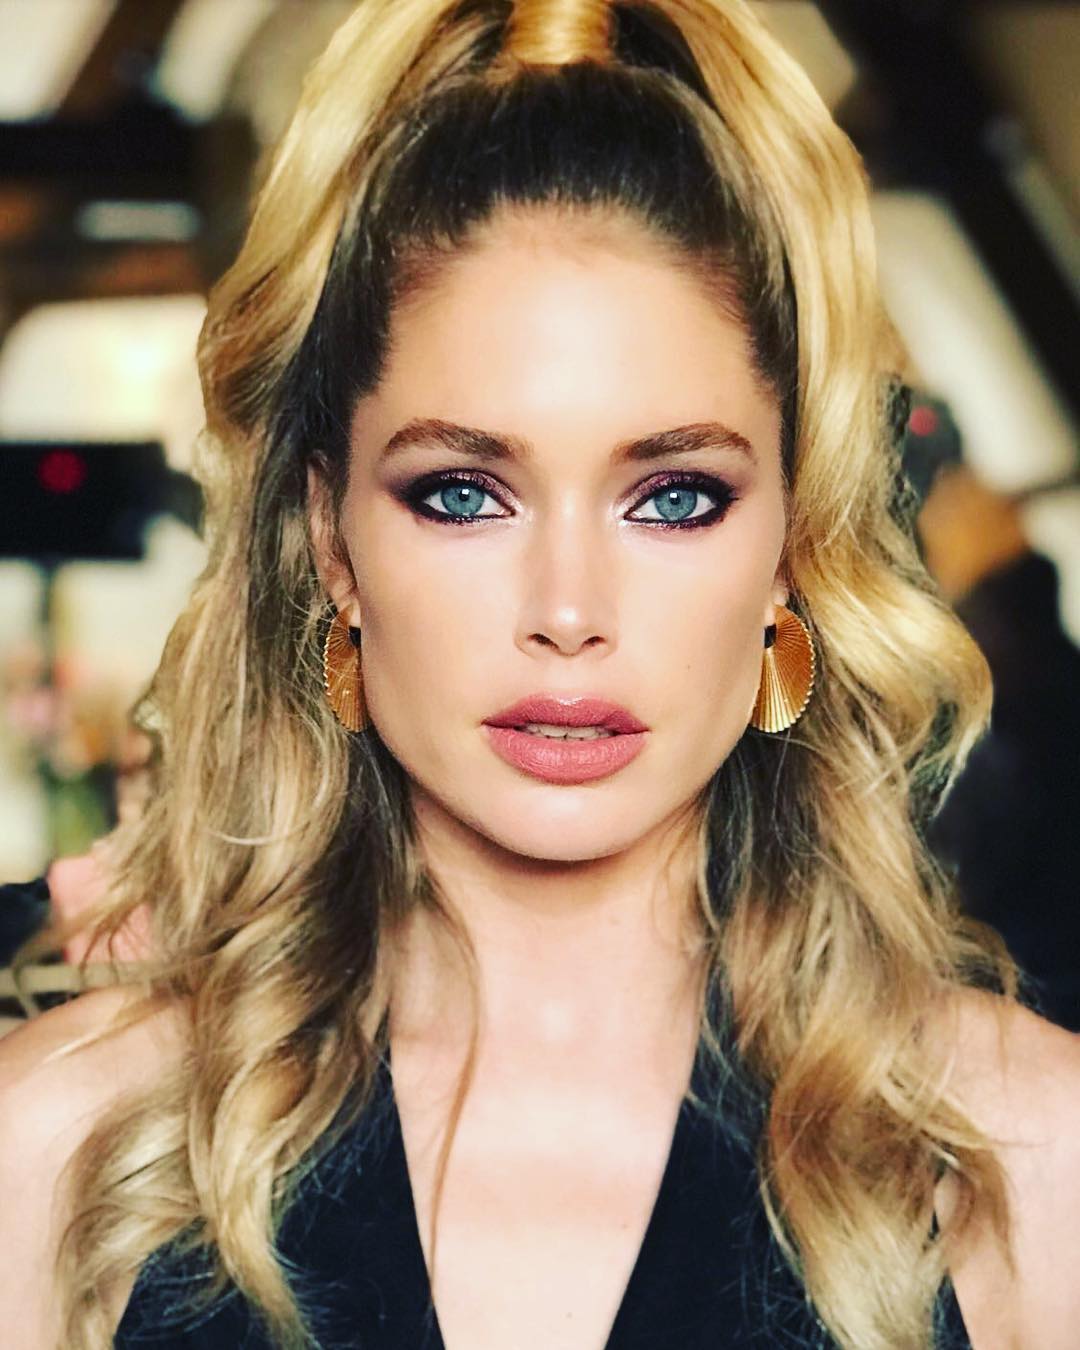 75+ Hot And Sexy Pictures Of Doutzen Kroes Will Make You Life A Bliss | Best Of Comic Books